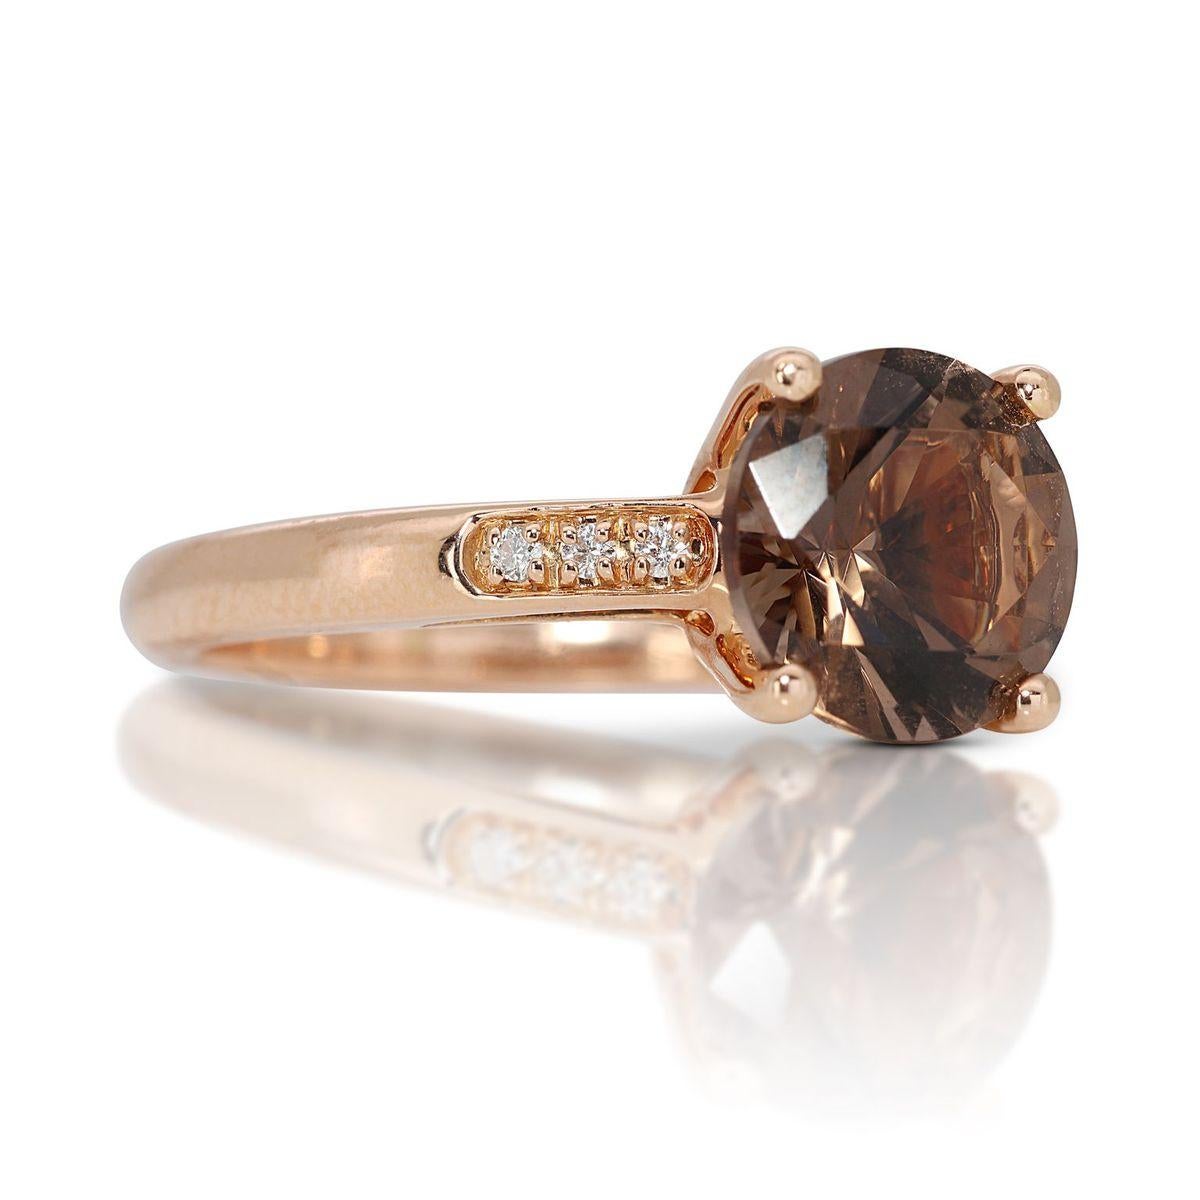 Women's Gorgeous 18k Rose Gold Pave Ring with 1.83 Carat Natural Quartz and Diamonds